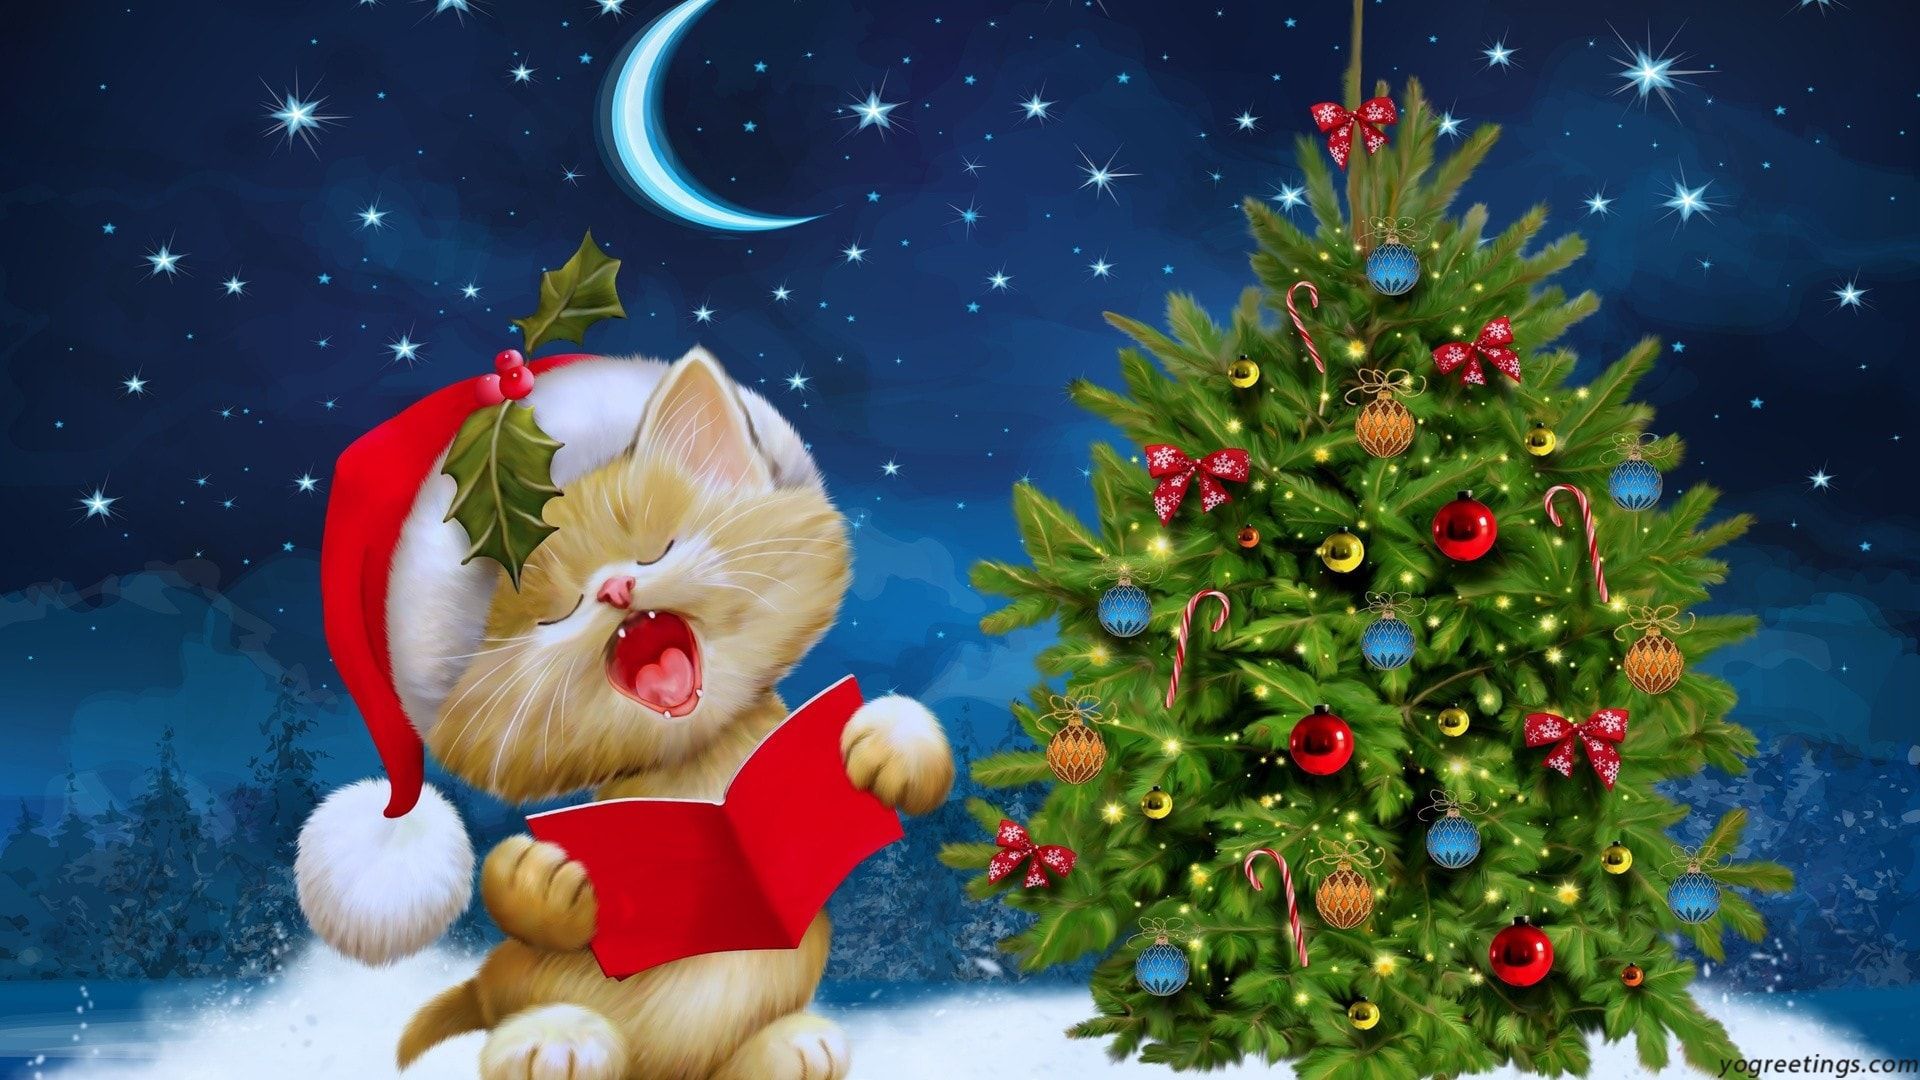 Merry Christmas Wallpaper Full HD Free Download